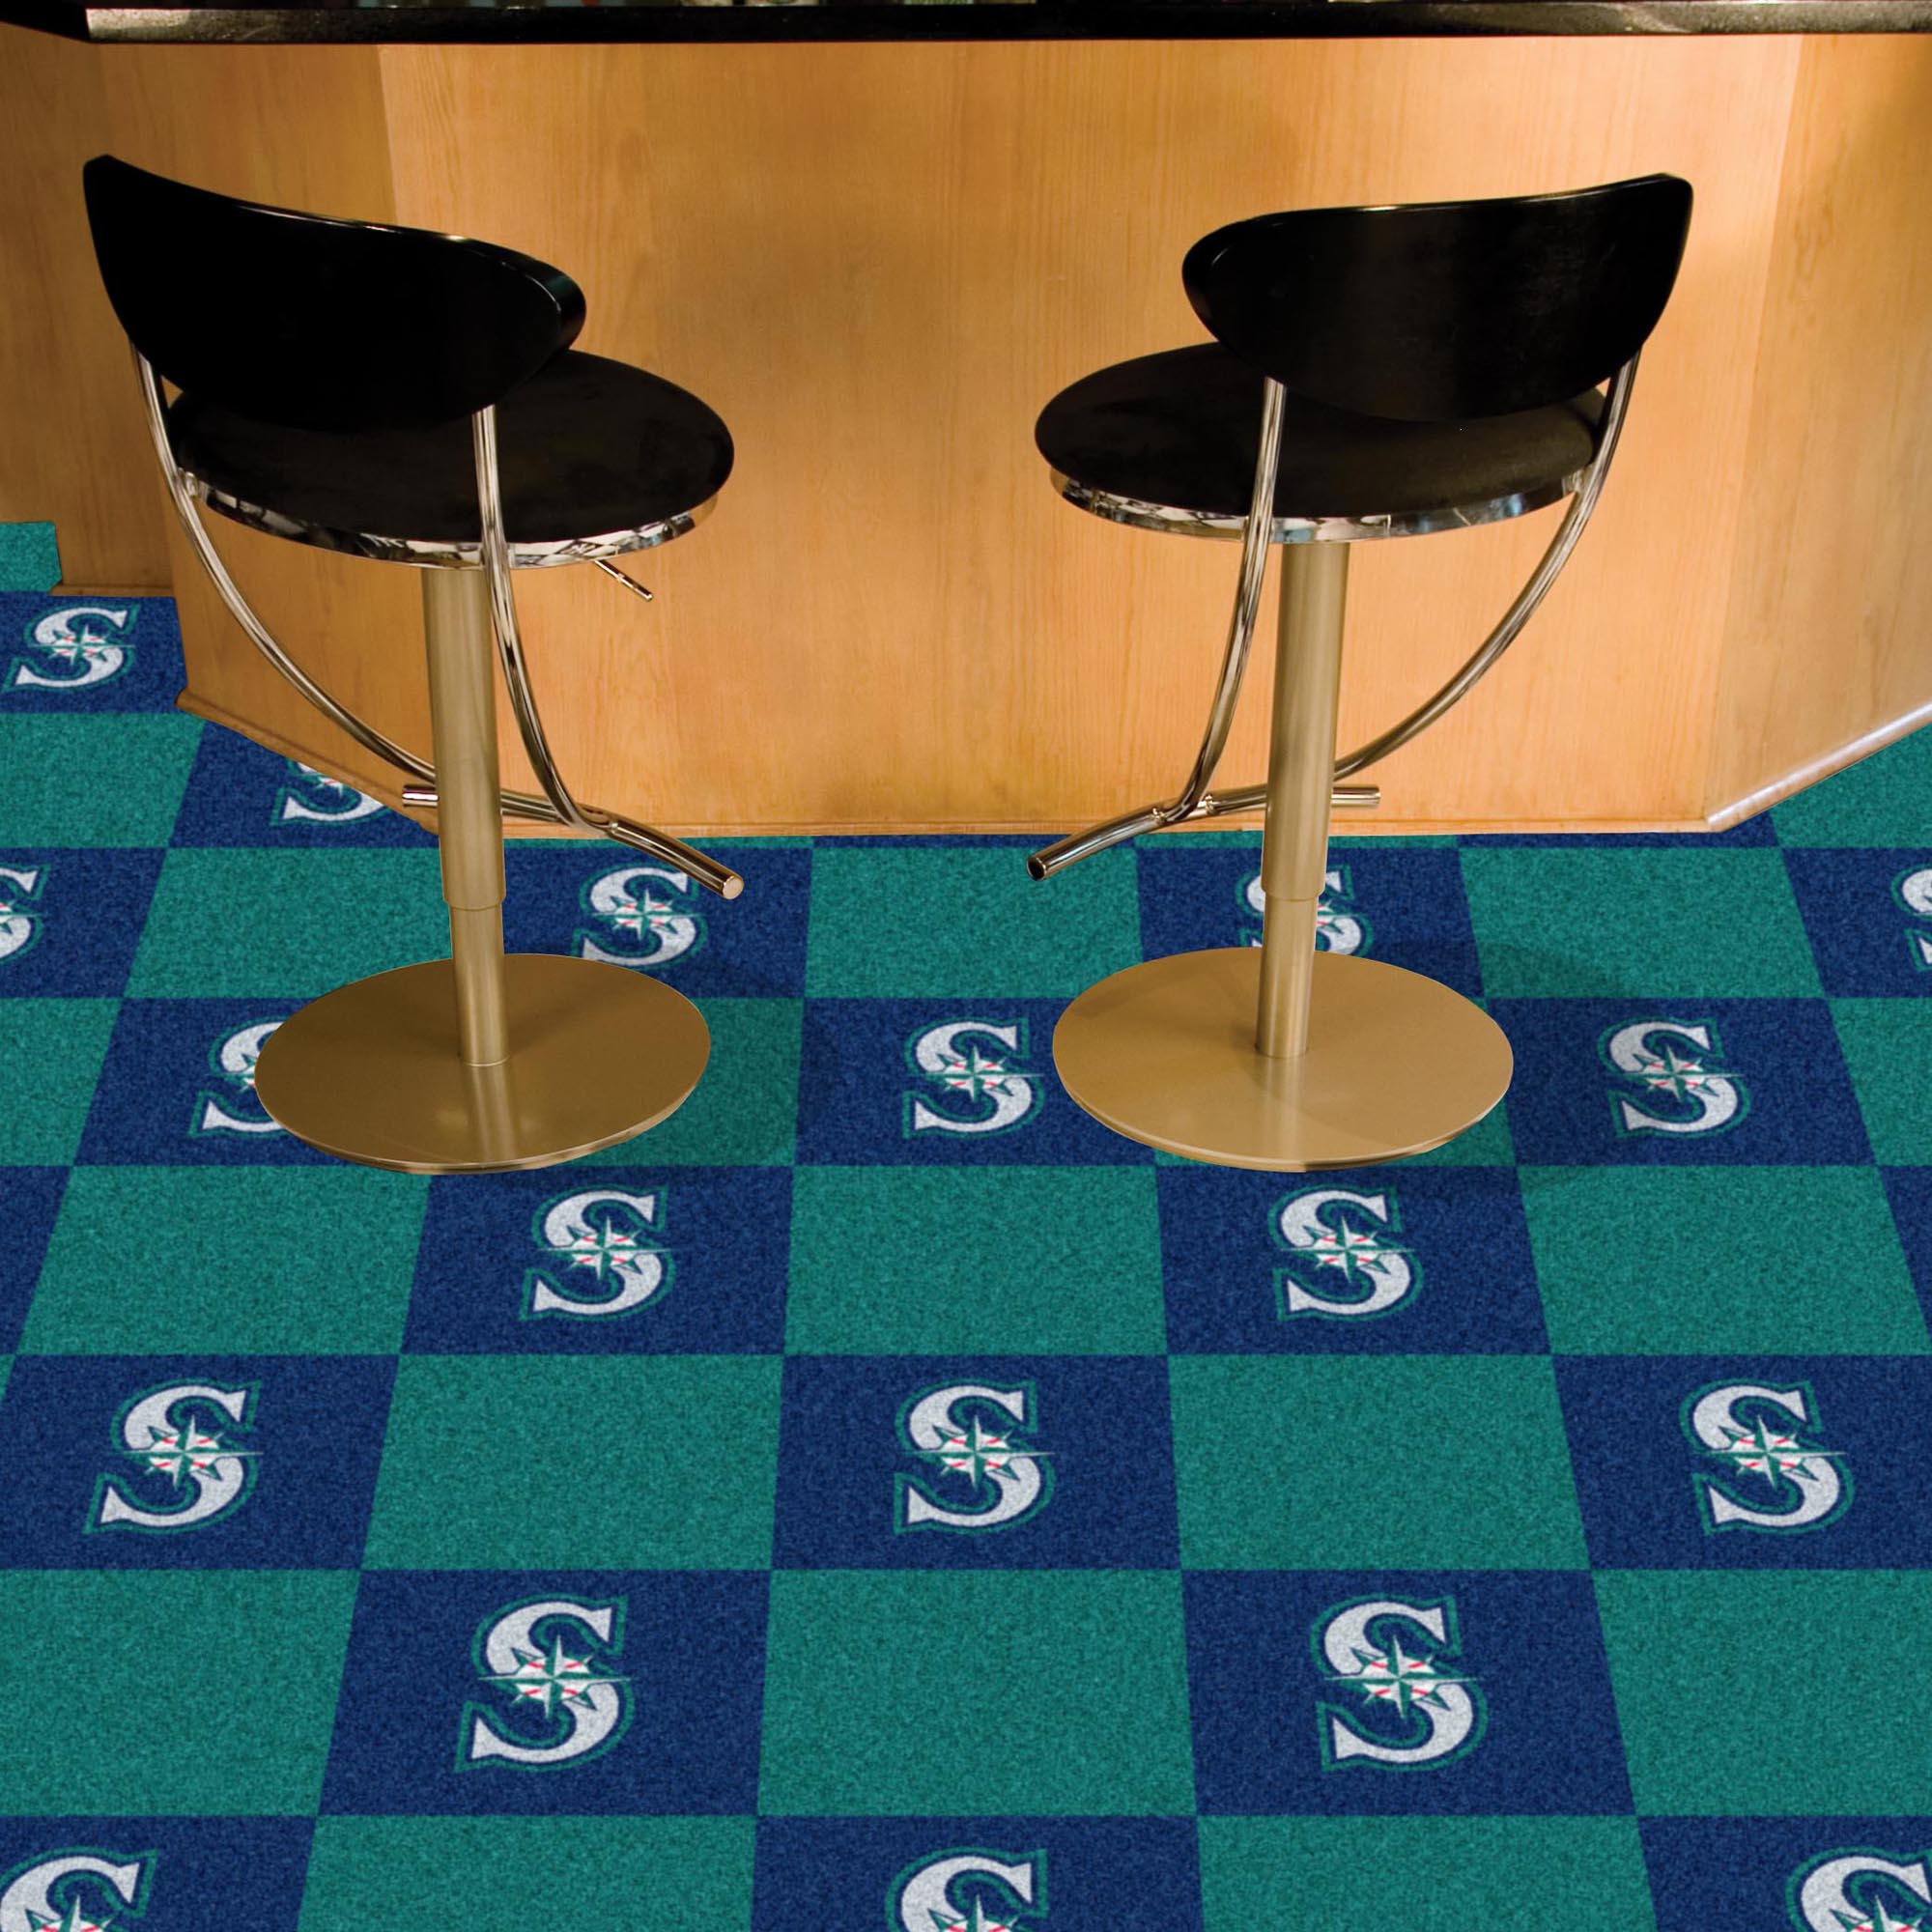 Seattle Mariners Carpet Tiles 18x18 in.